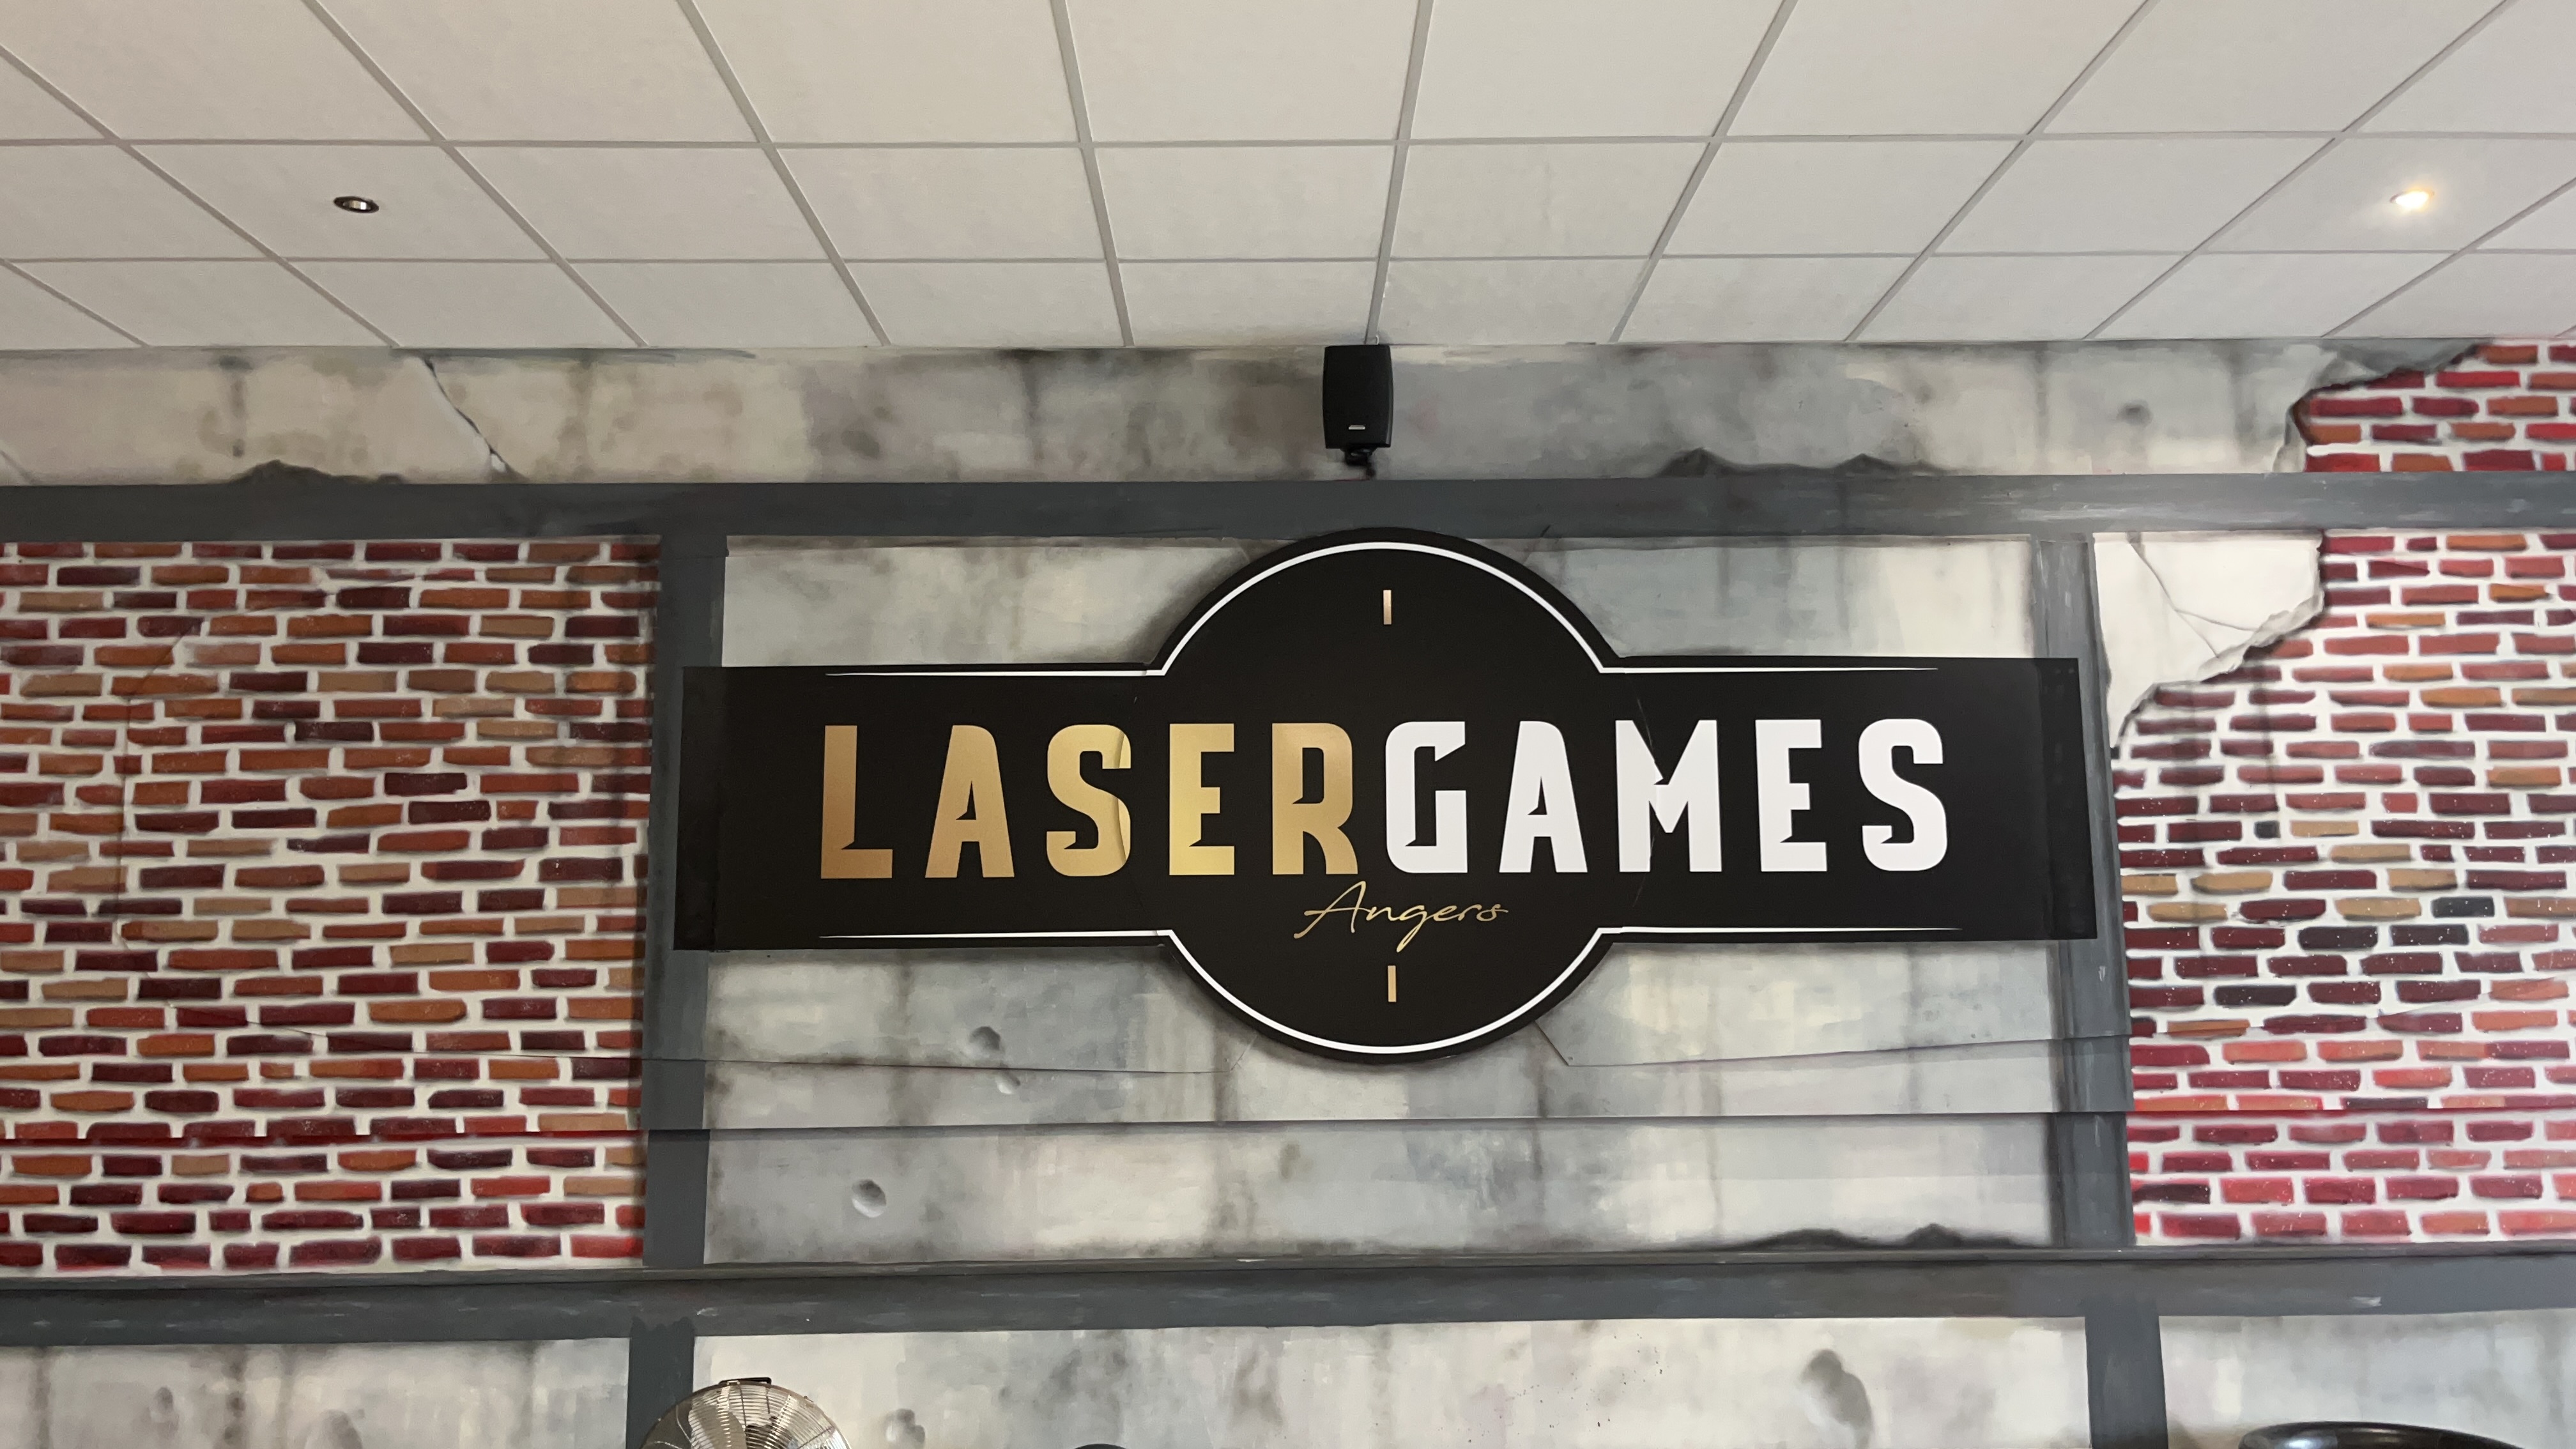 Lasergames Angers©